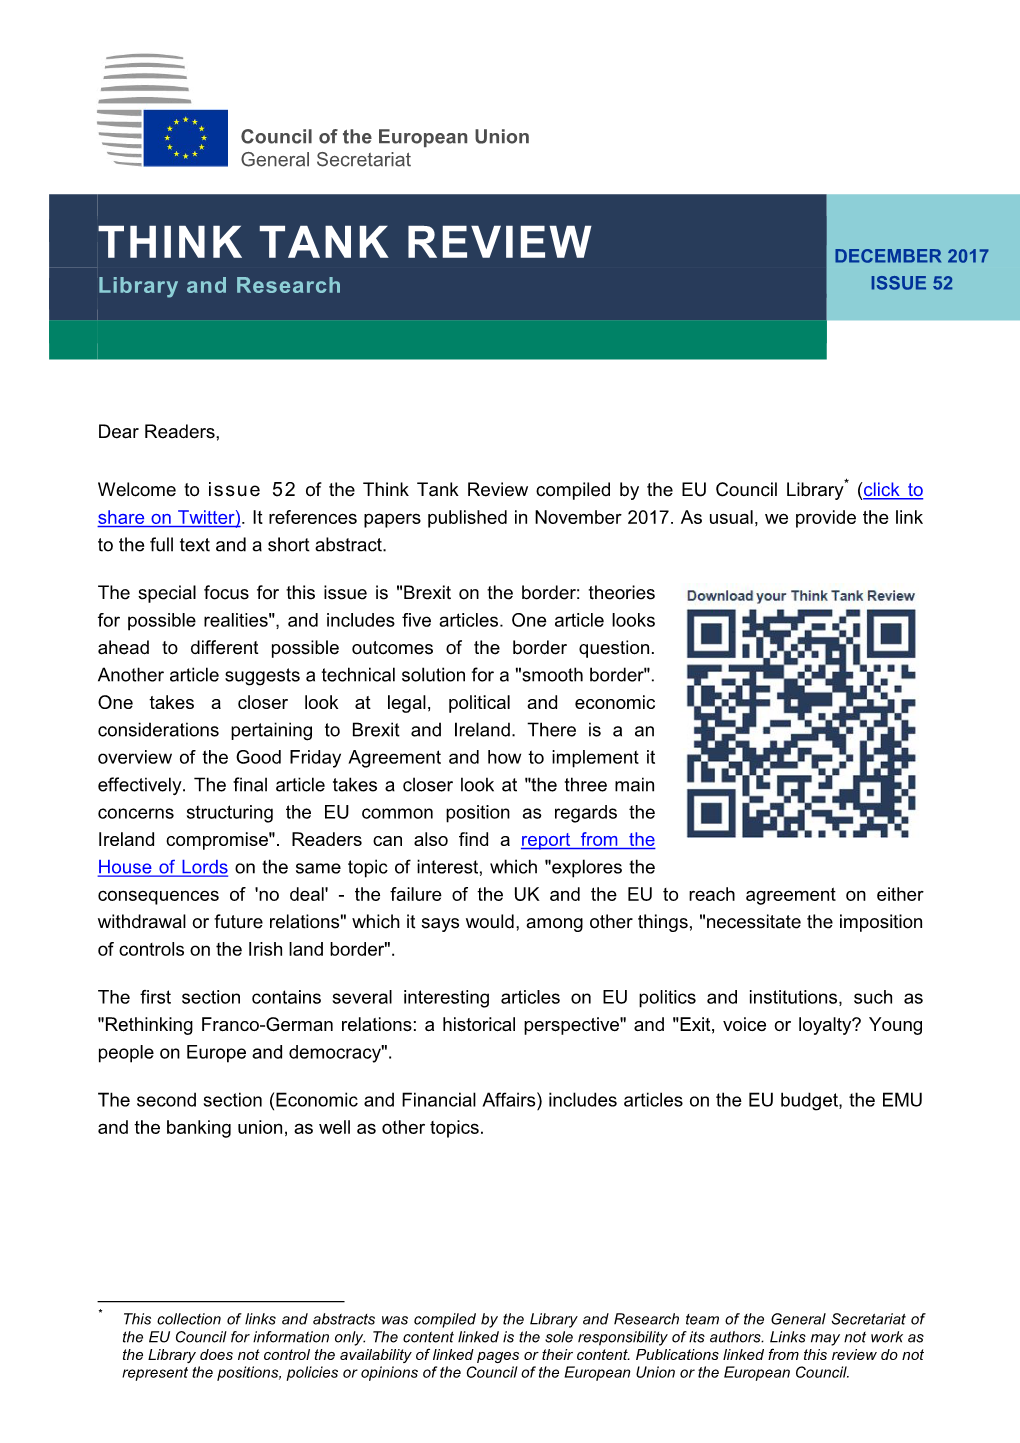 Think Tank Review December 2017